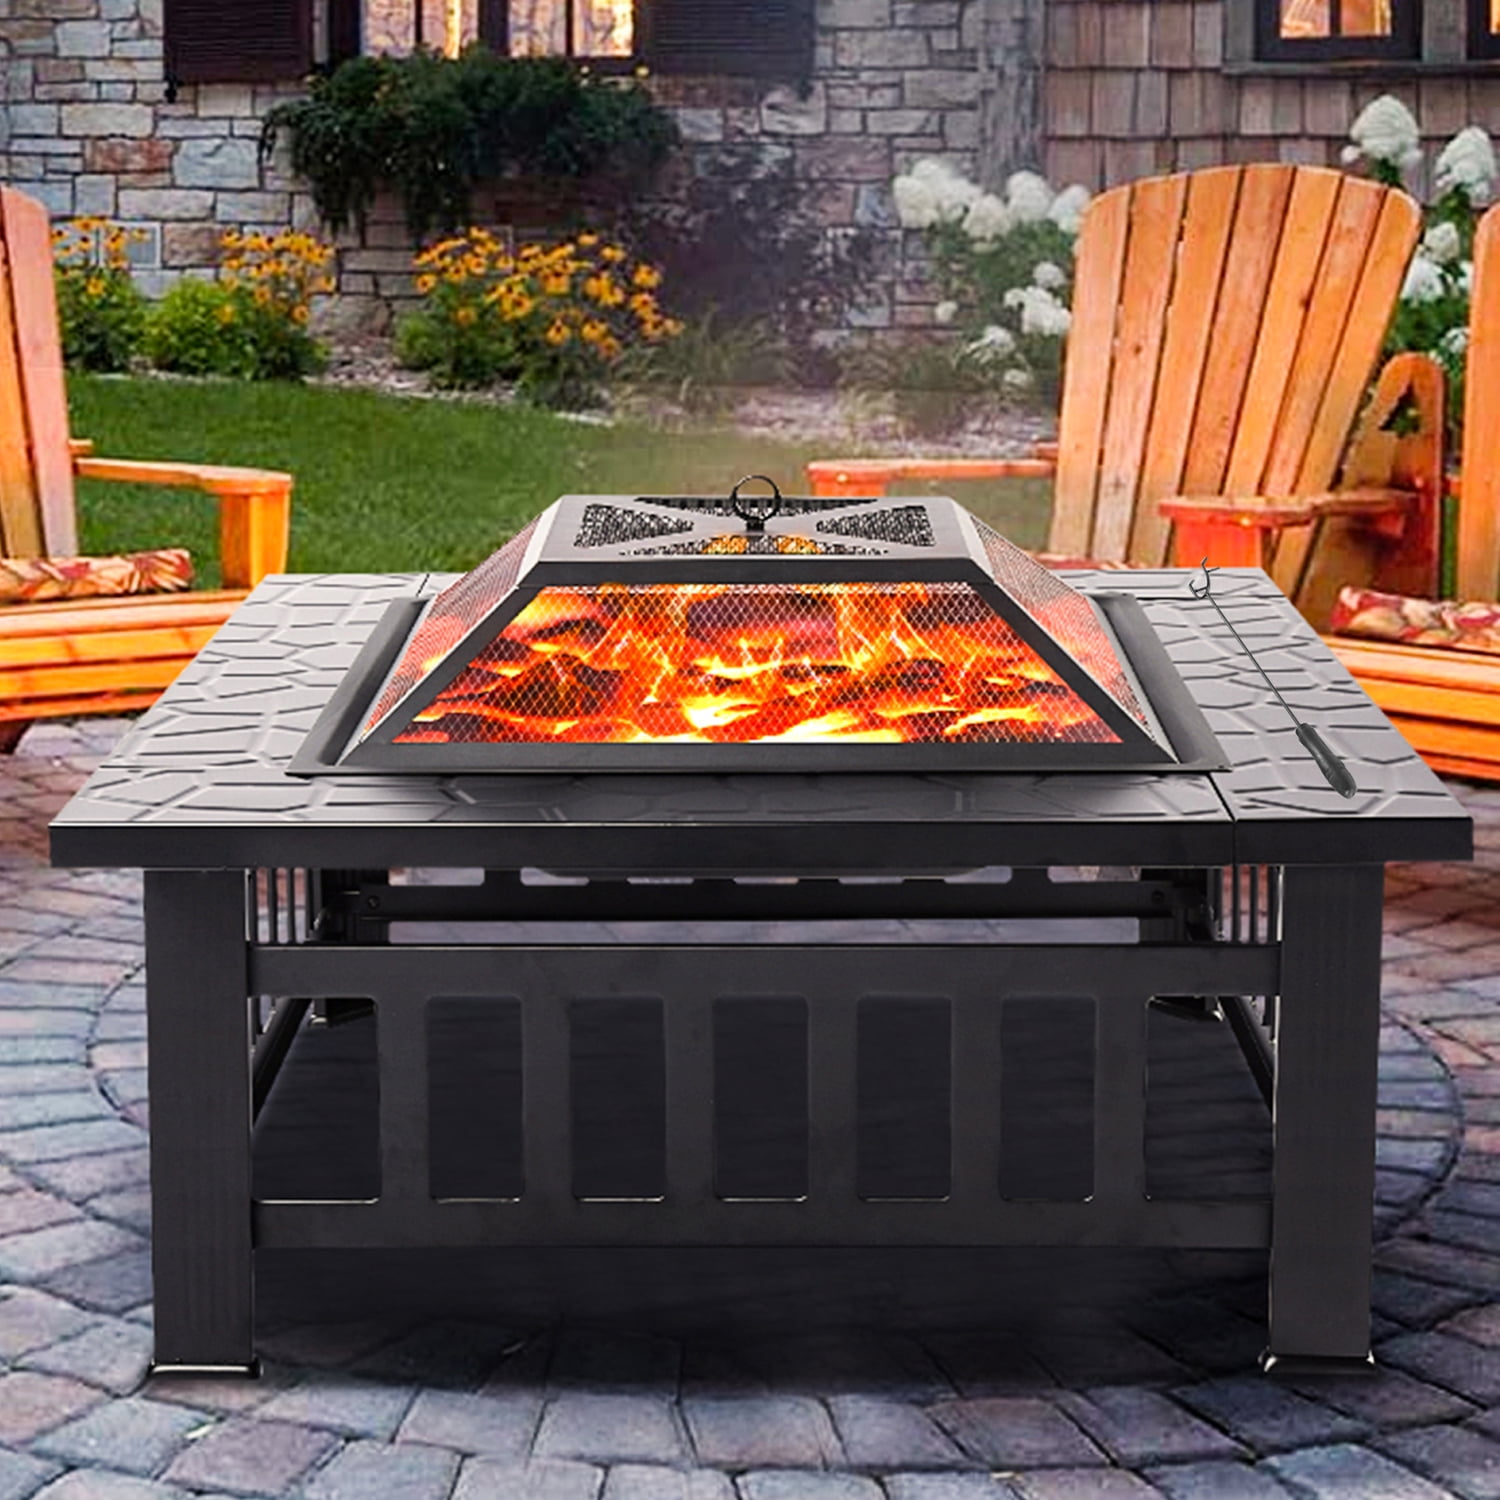 32" Wood Burning Fire Pit Outdoor Garden Patio BBQ Grill Square Stove W/ Cover 